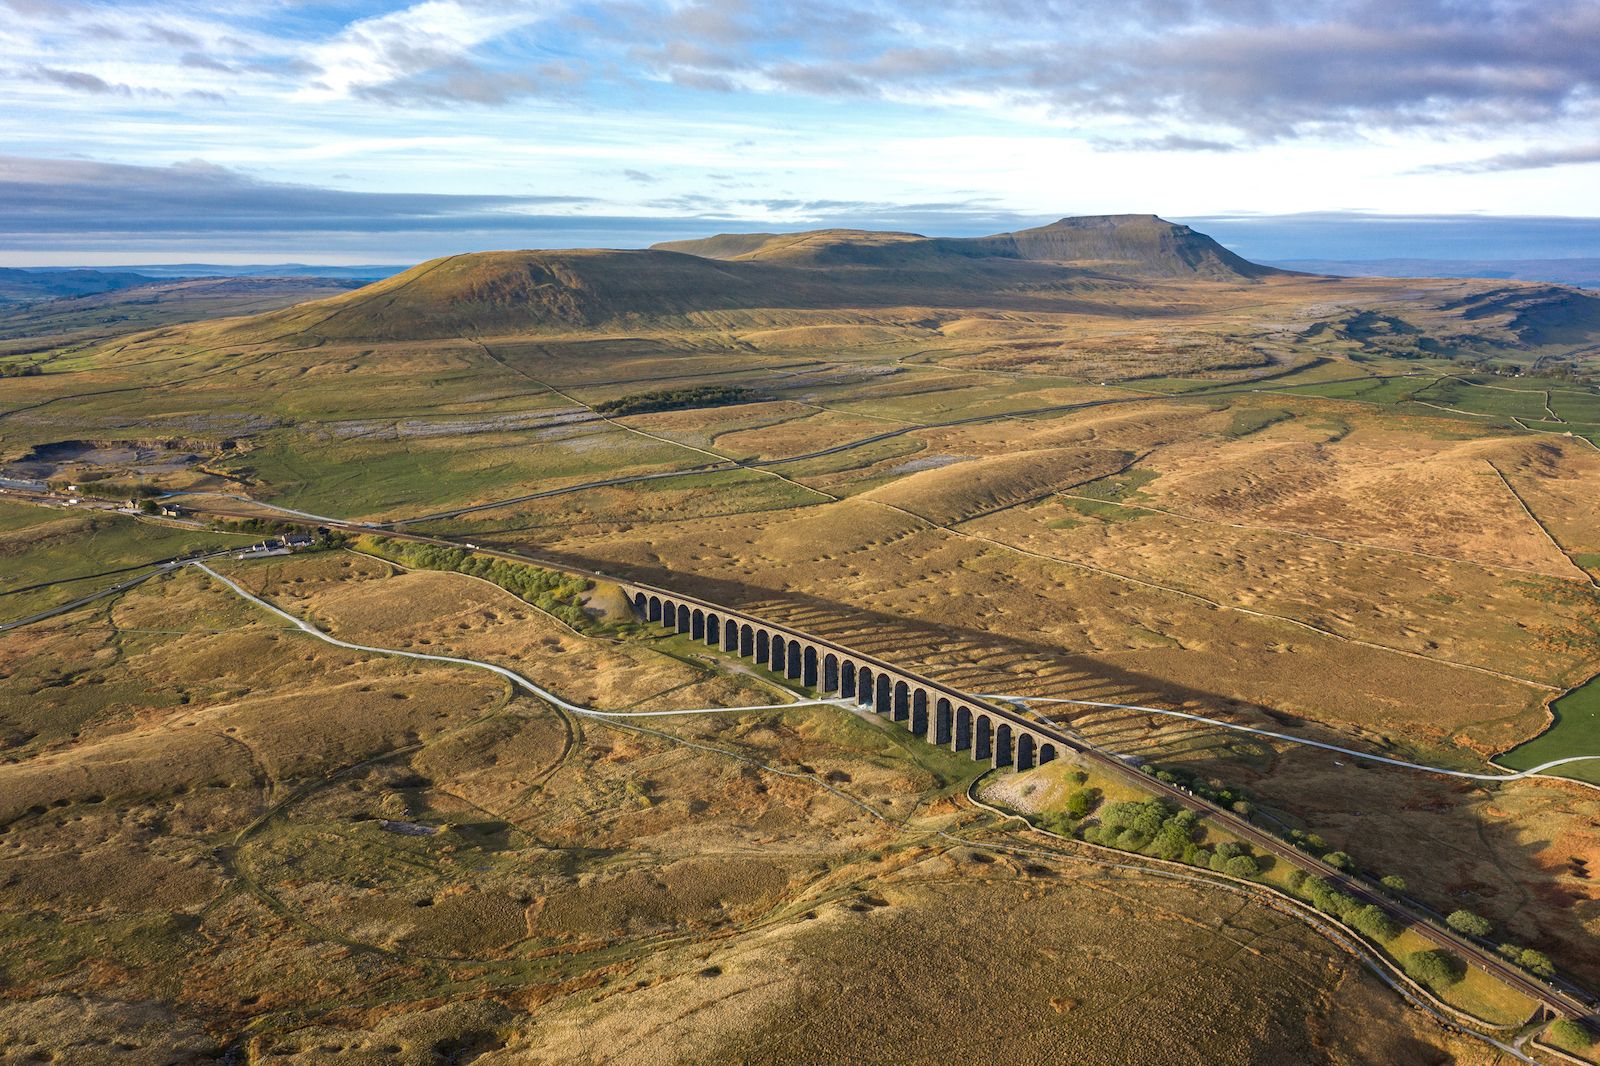 A view of Ingleborough, the Ribblehead Viaduct and Horton-in-Ribblesdale. Photo: Getty.